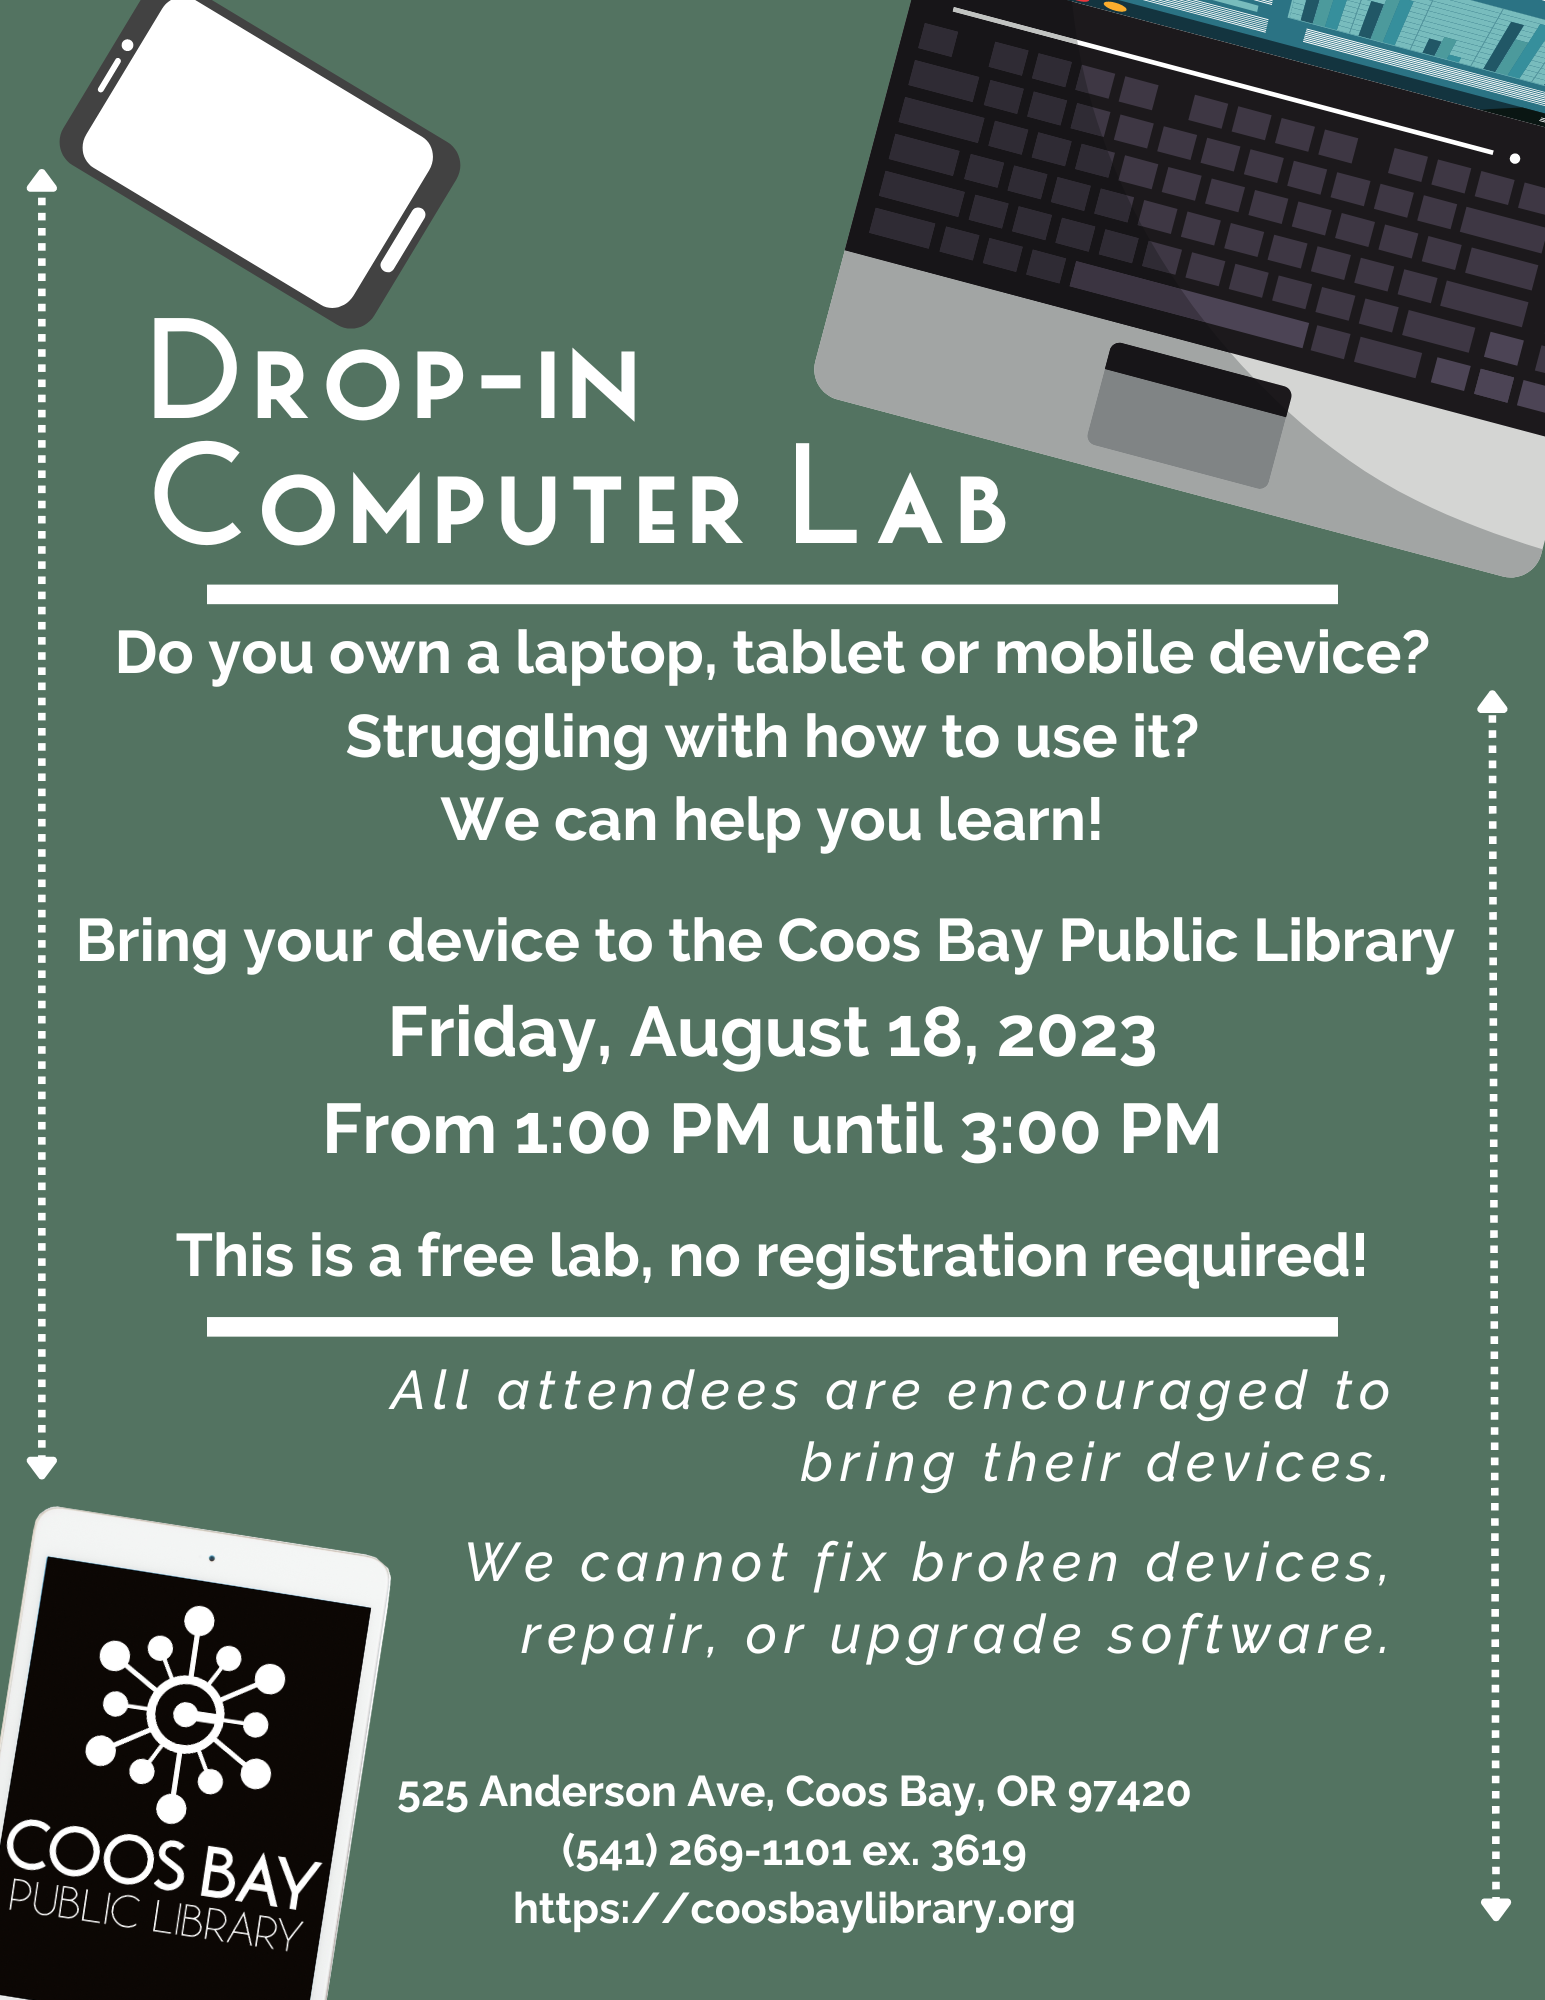 Drop-in computer lab flyer for aug 22 from 1 pm to 3 pm